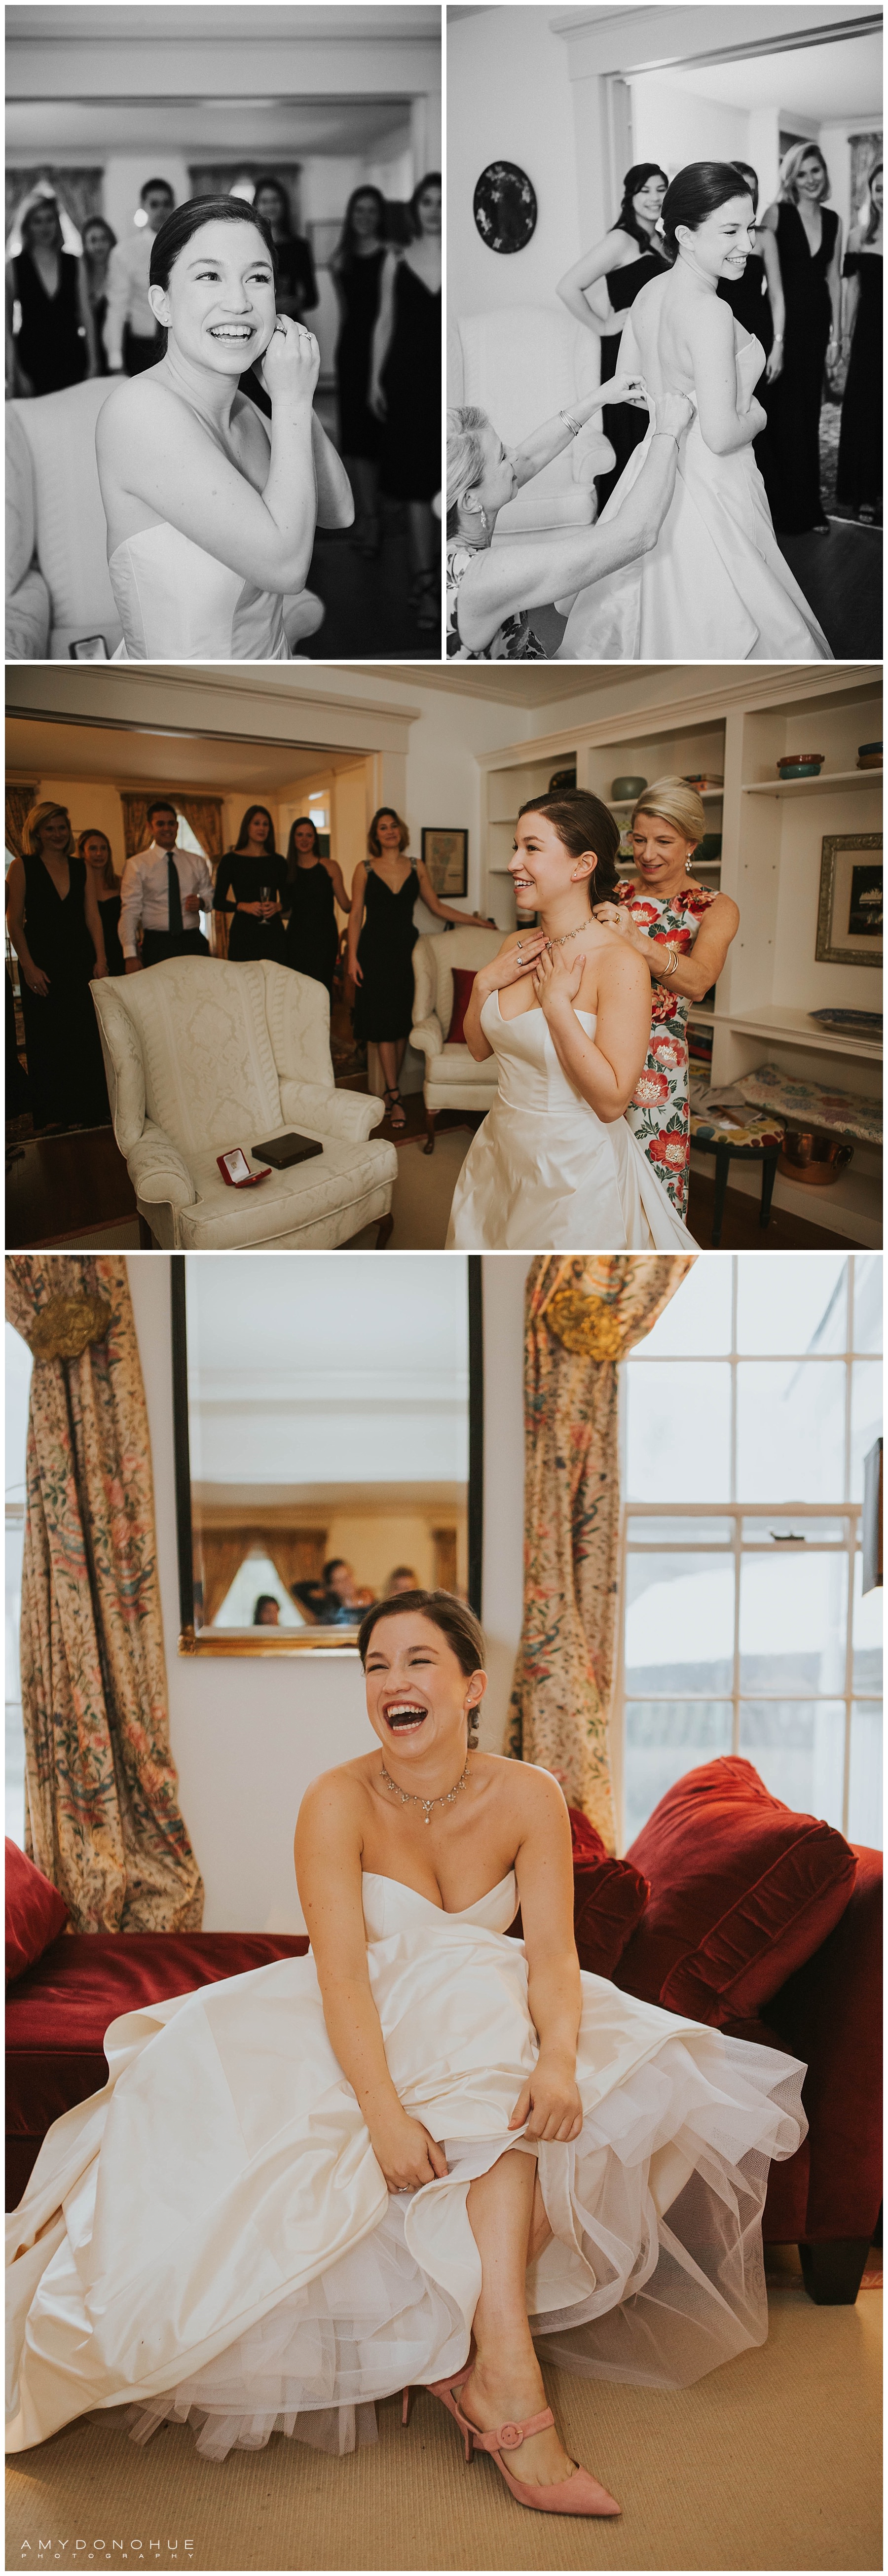 Bridal Getting Ready Details | Woodstock, Vermont Wedding Photographer | © Amy Donohue Photography